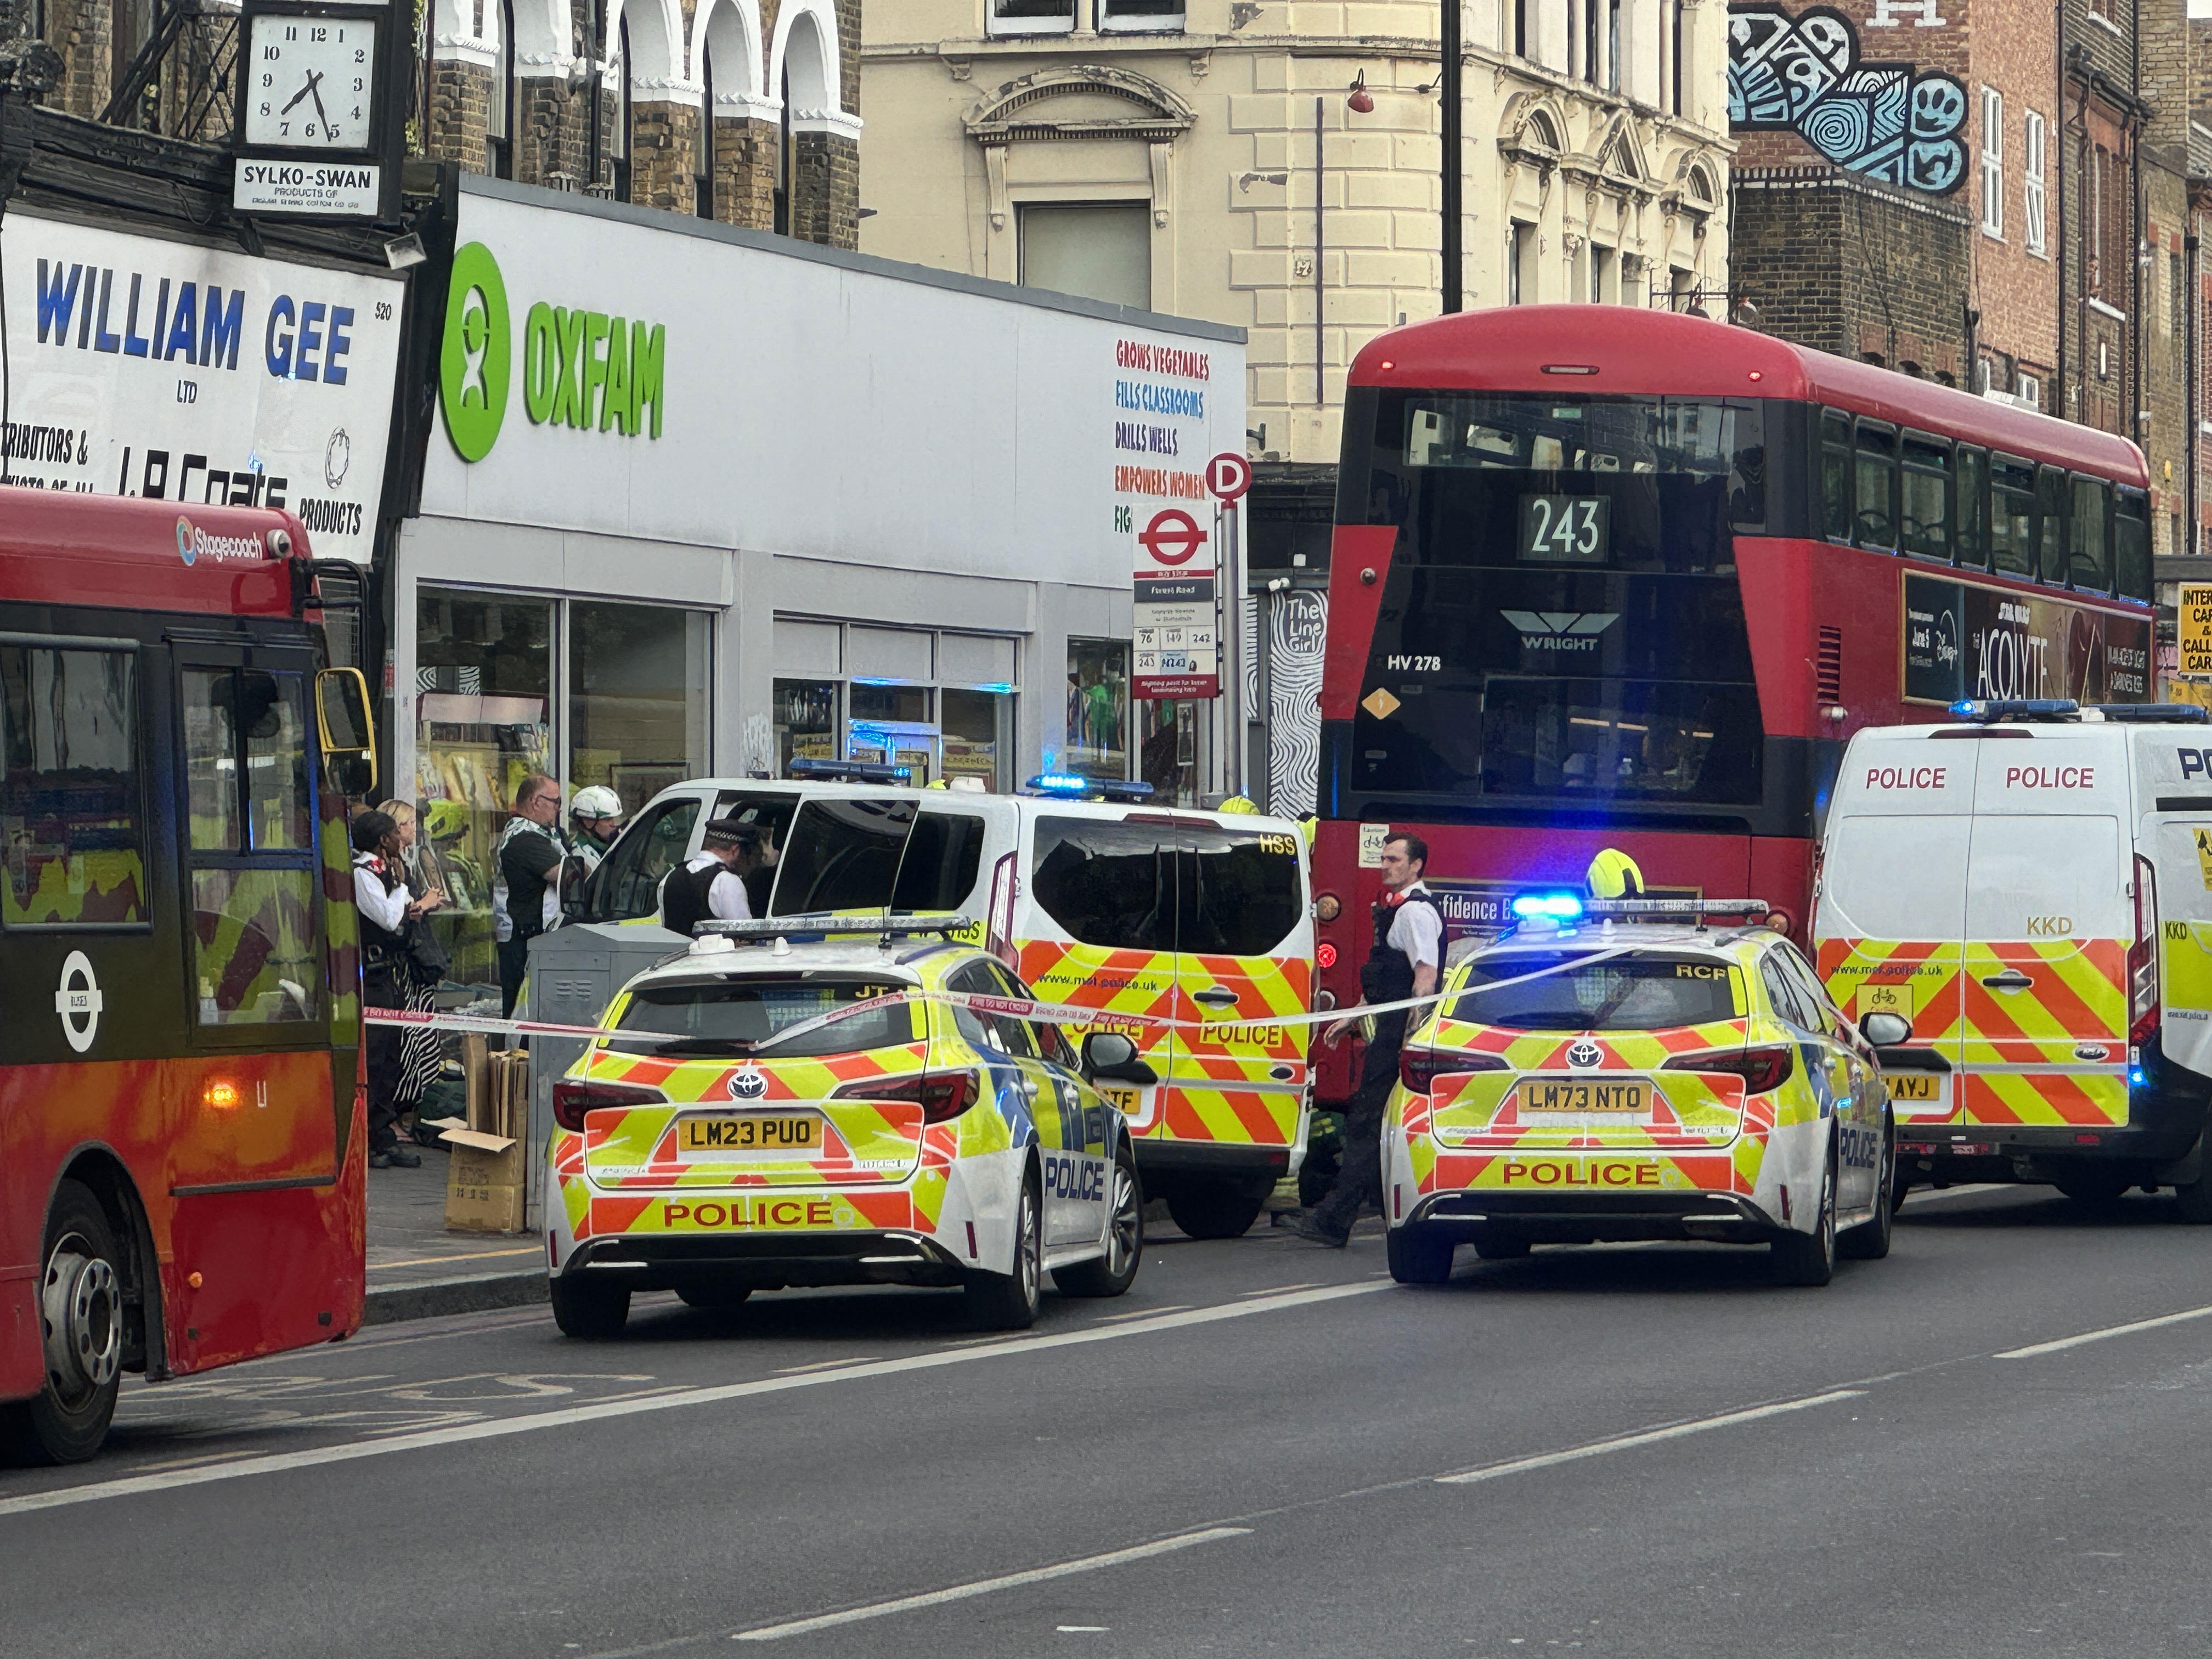 A man was trapped underneath a double decker bus this evening as cops desperately raced to free him